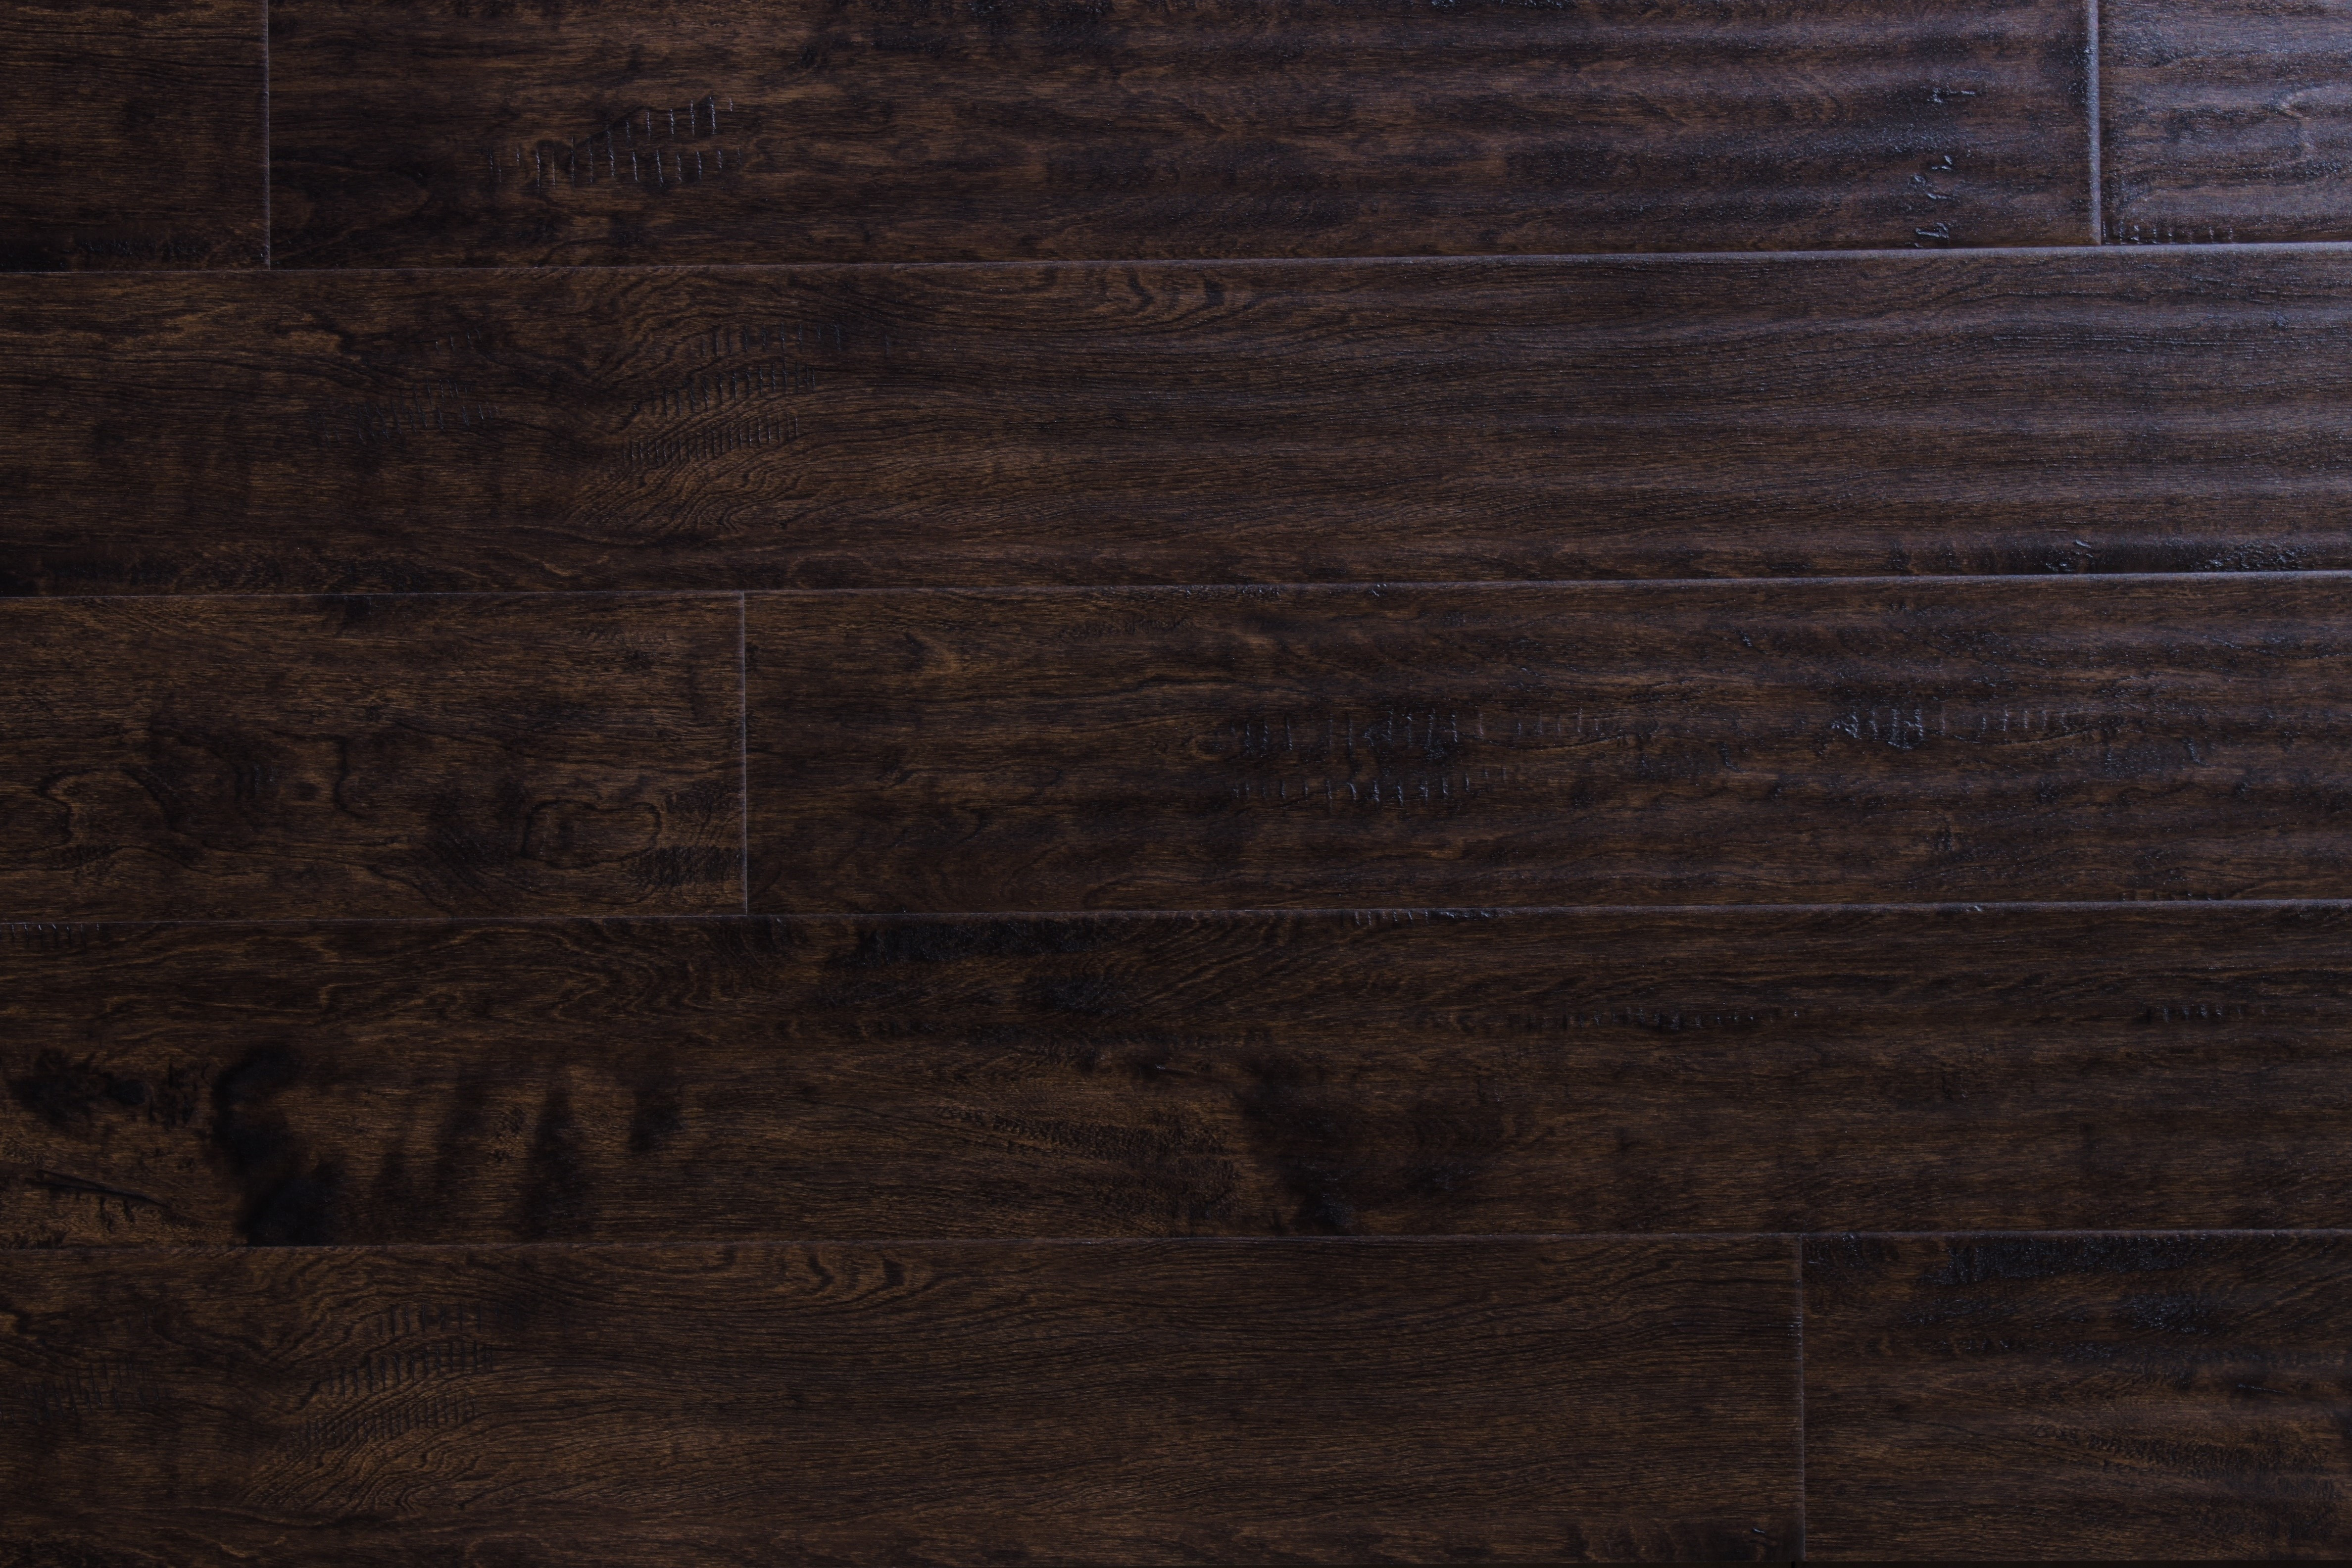 25 Popular Bruce Maple Hardwood Flooring Reviews 2024 free download bruce maple hardwood flooring reviews of wood flooring free samples available at builddirecta in tailor multi gb 5874277bb8d3c